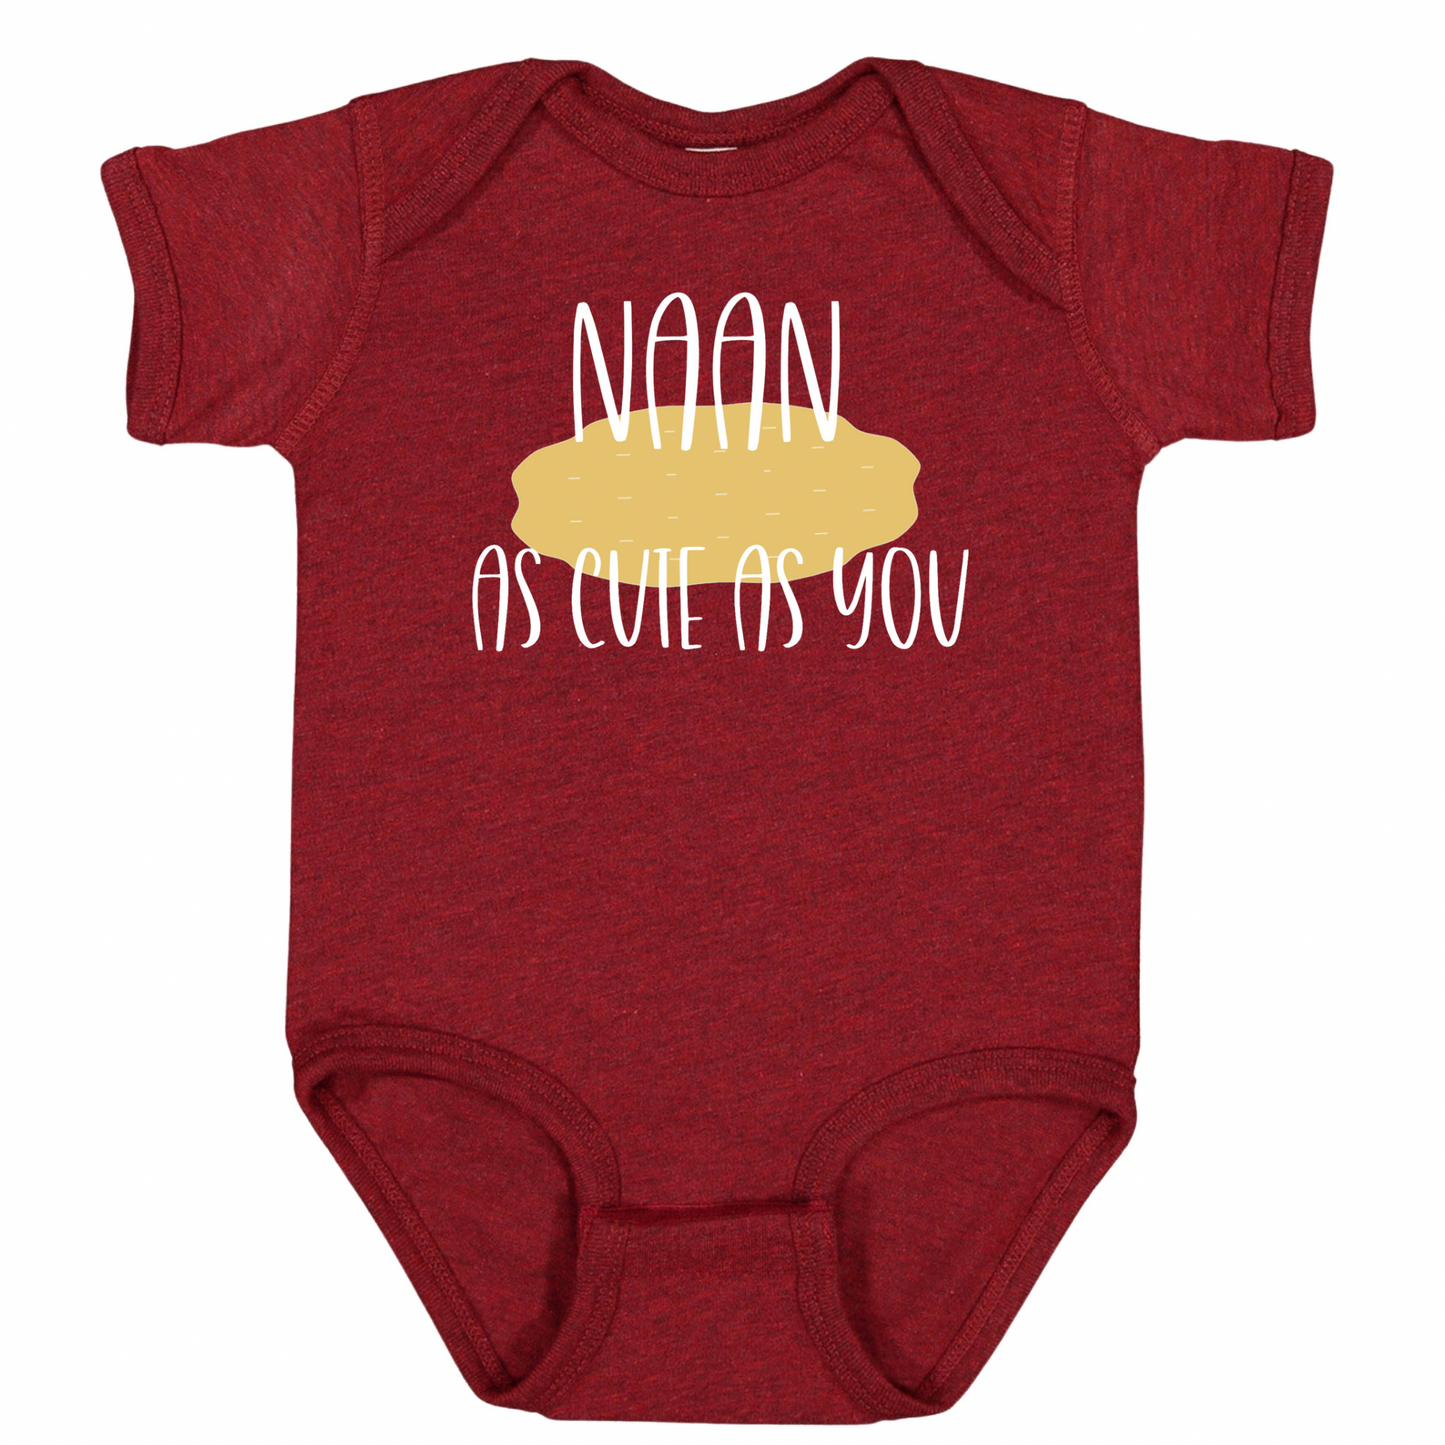 NAAN AS CUTE AS YOU (White Font)- Short Sleeve Onesie